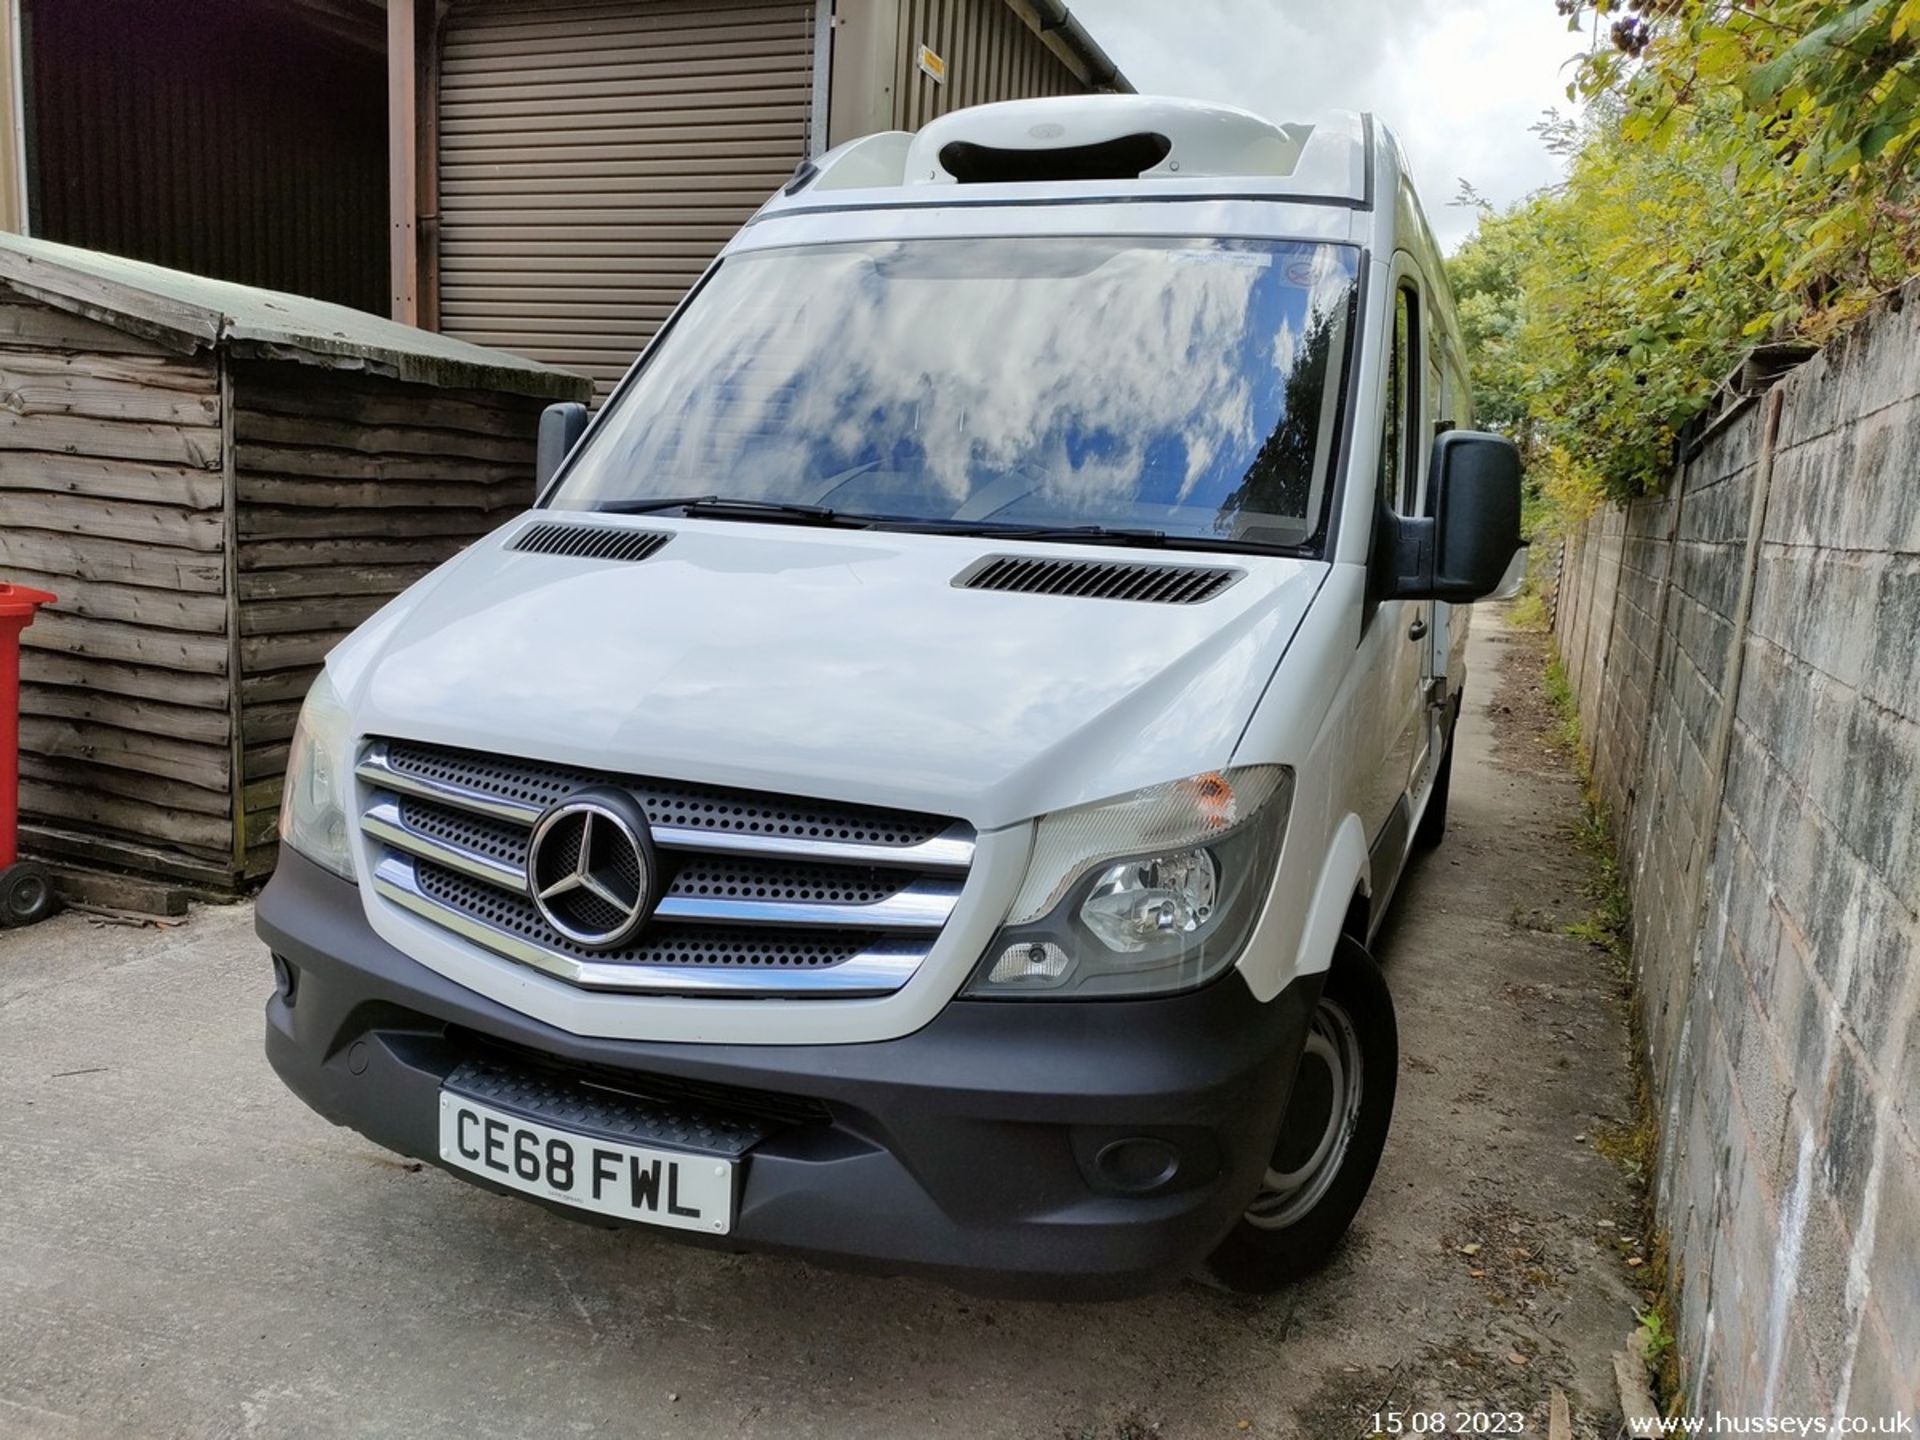 18/68 MERCEDES-BENZ SPRINTER 314CDI - 2143cc 5dr Refrigerated (White) - Image 20 of 40